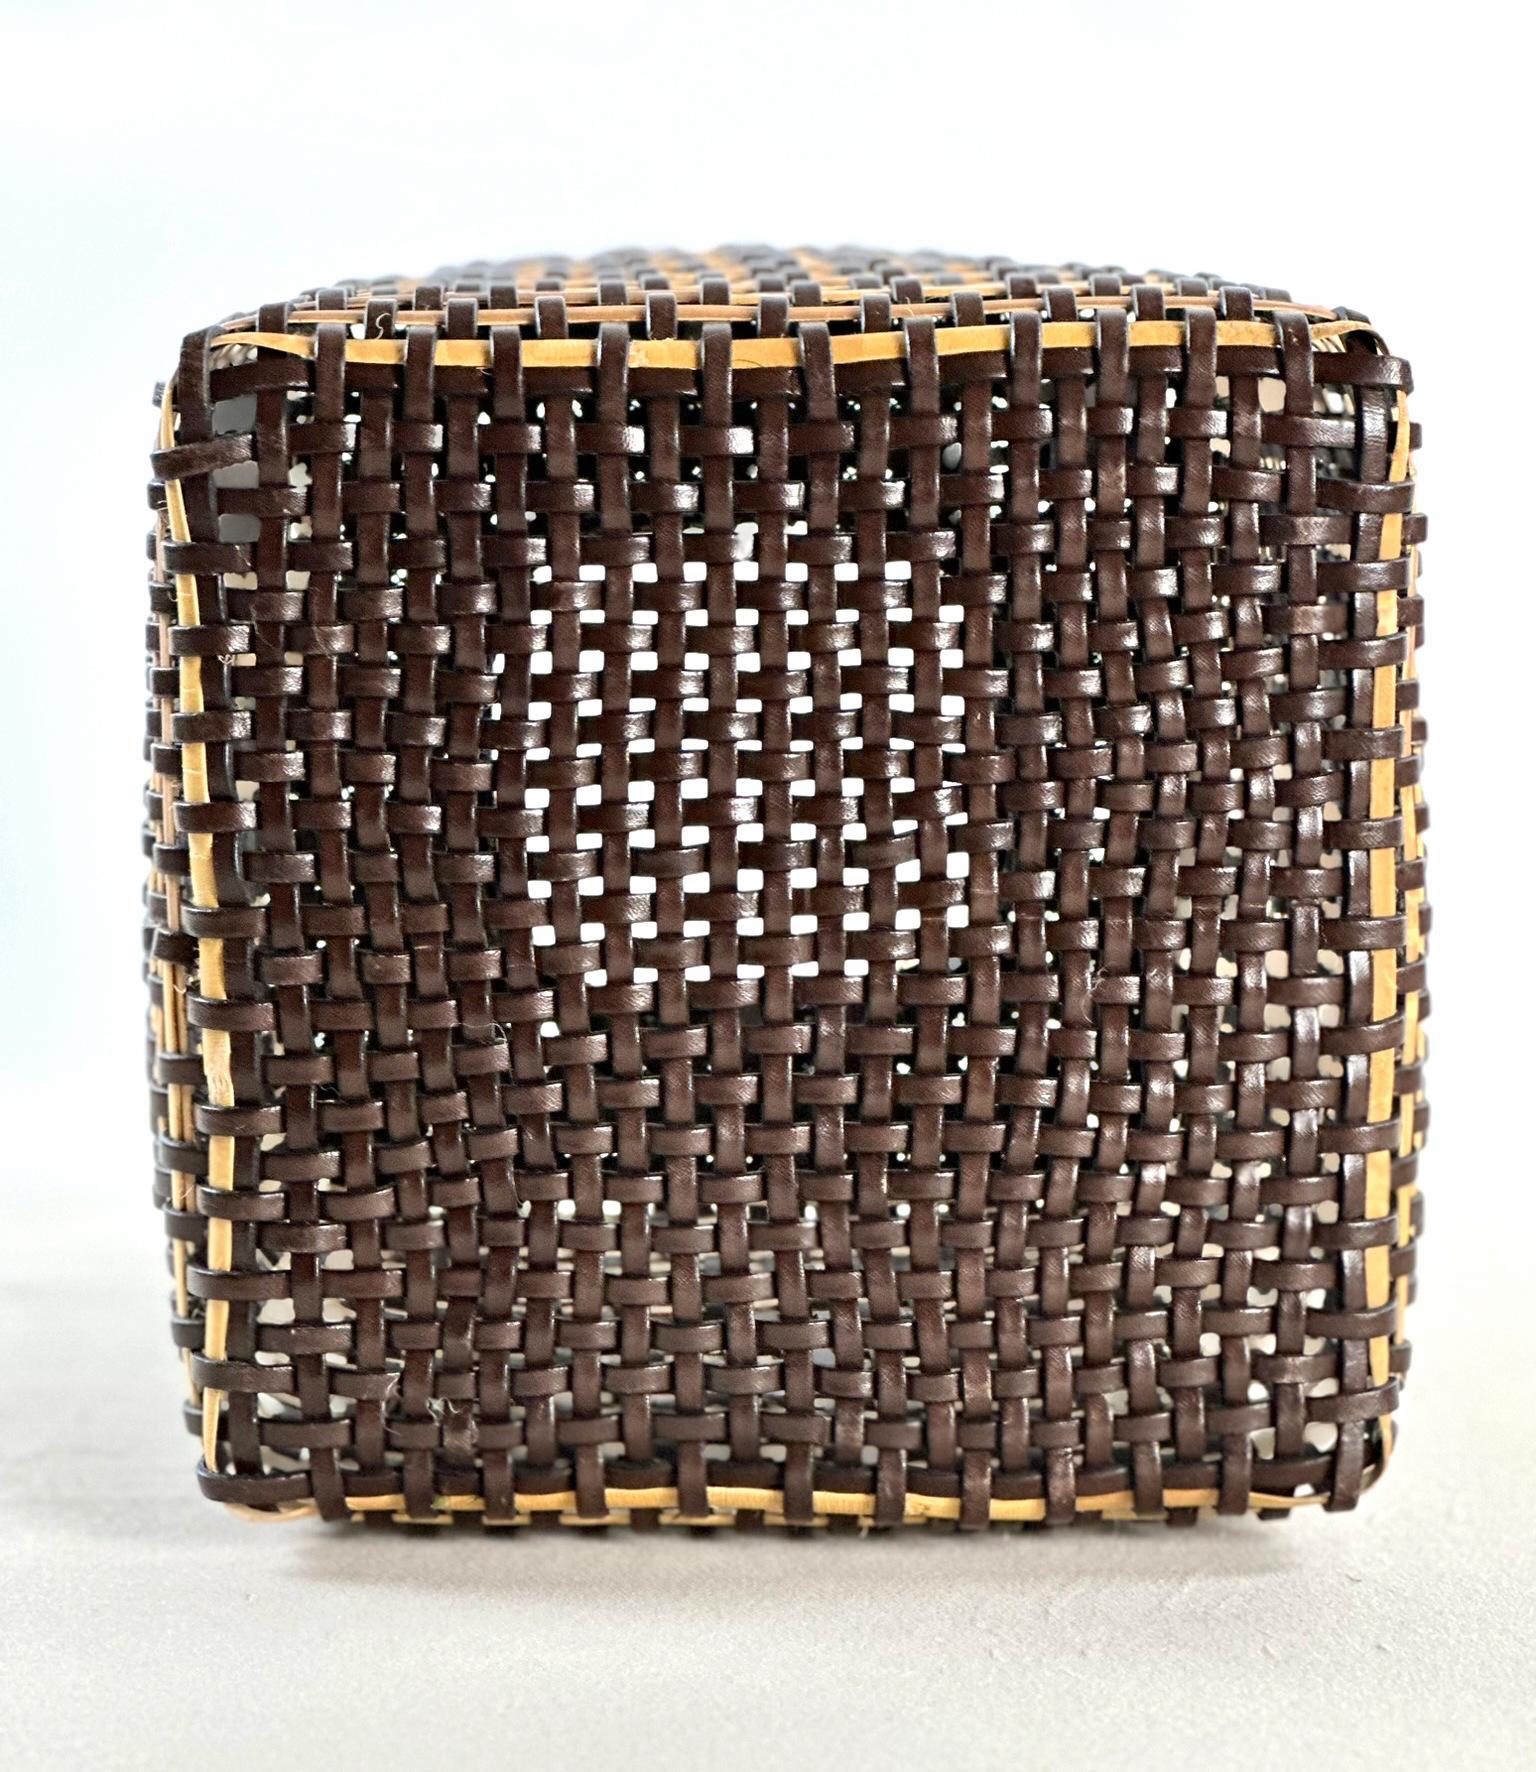 Hand-Woven Chinese Tibor Inspired Leather & Cane Handmade Basket Dark Brown Off White Color For Sale